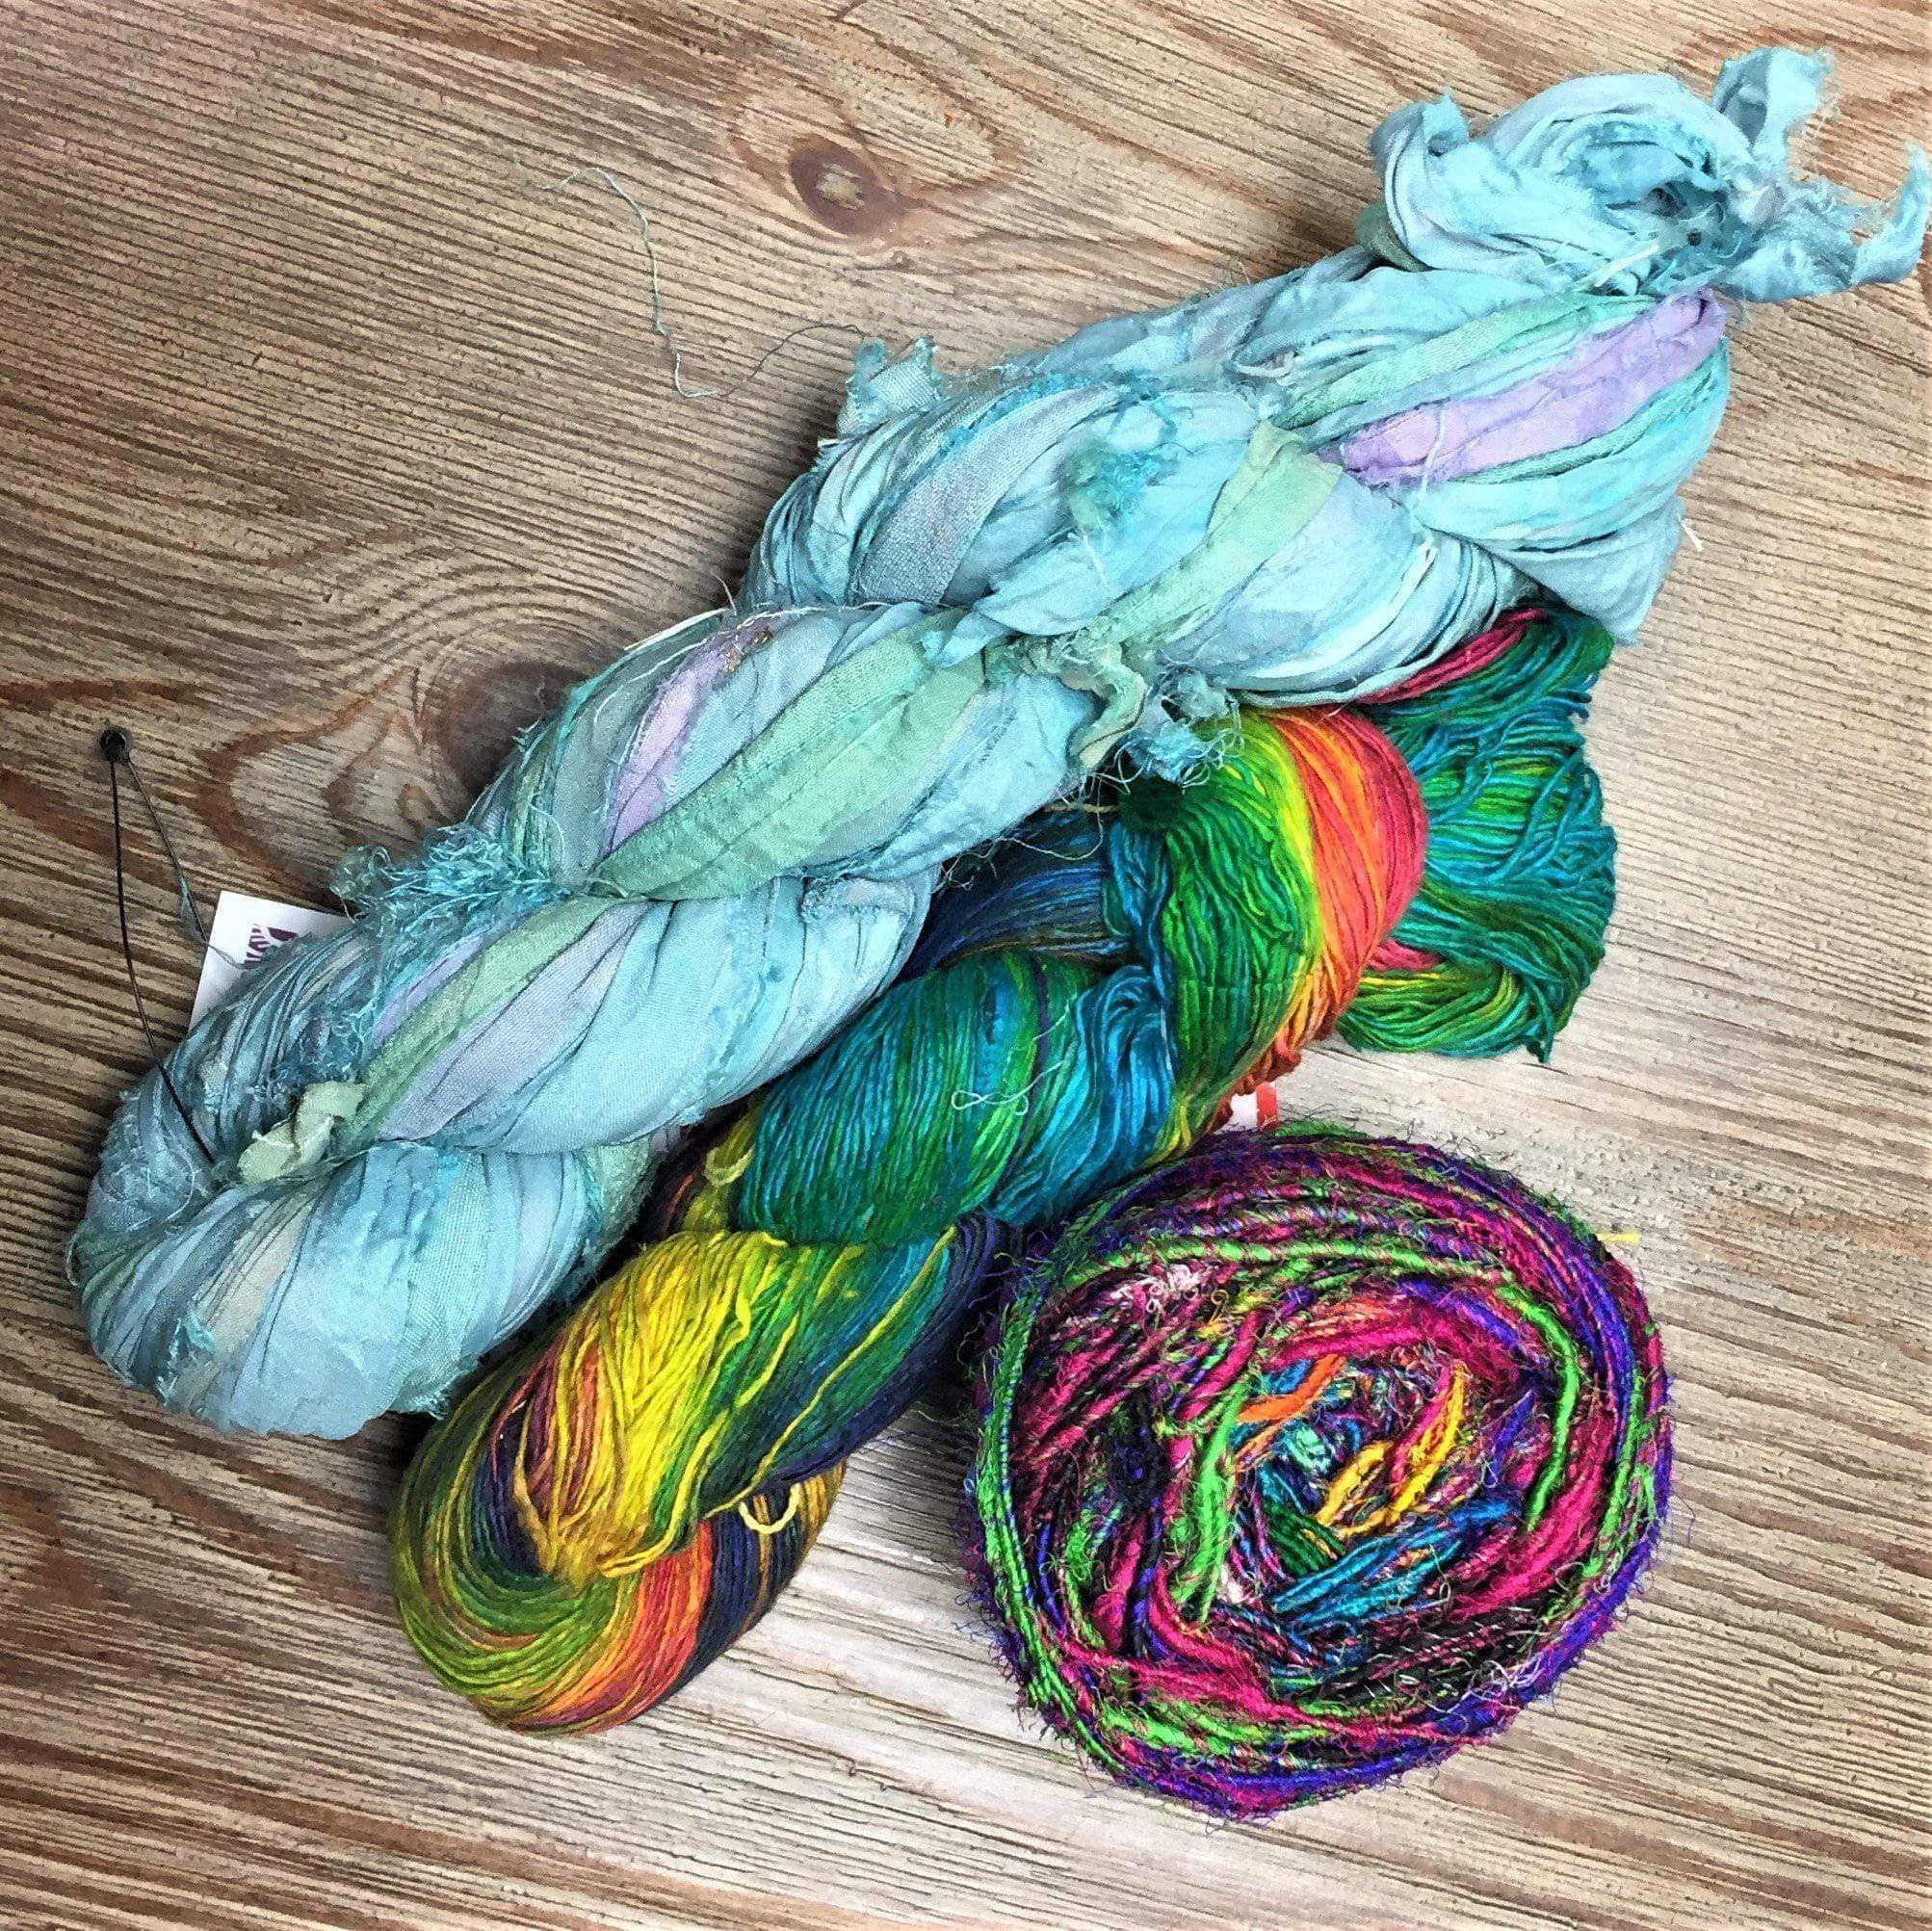 The Ultimate Guide to Choosing The Right Yarn for Your Next Project - Darn Good Yarn